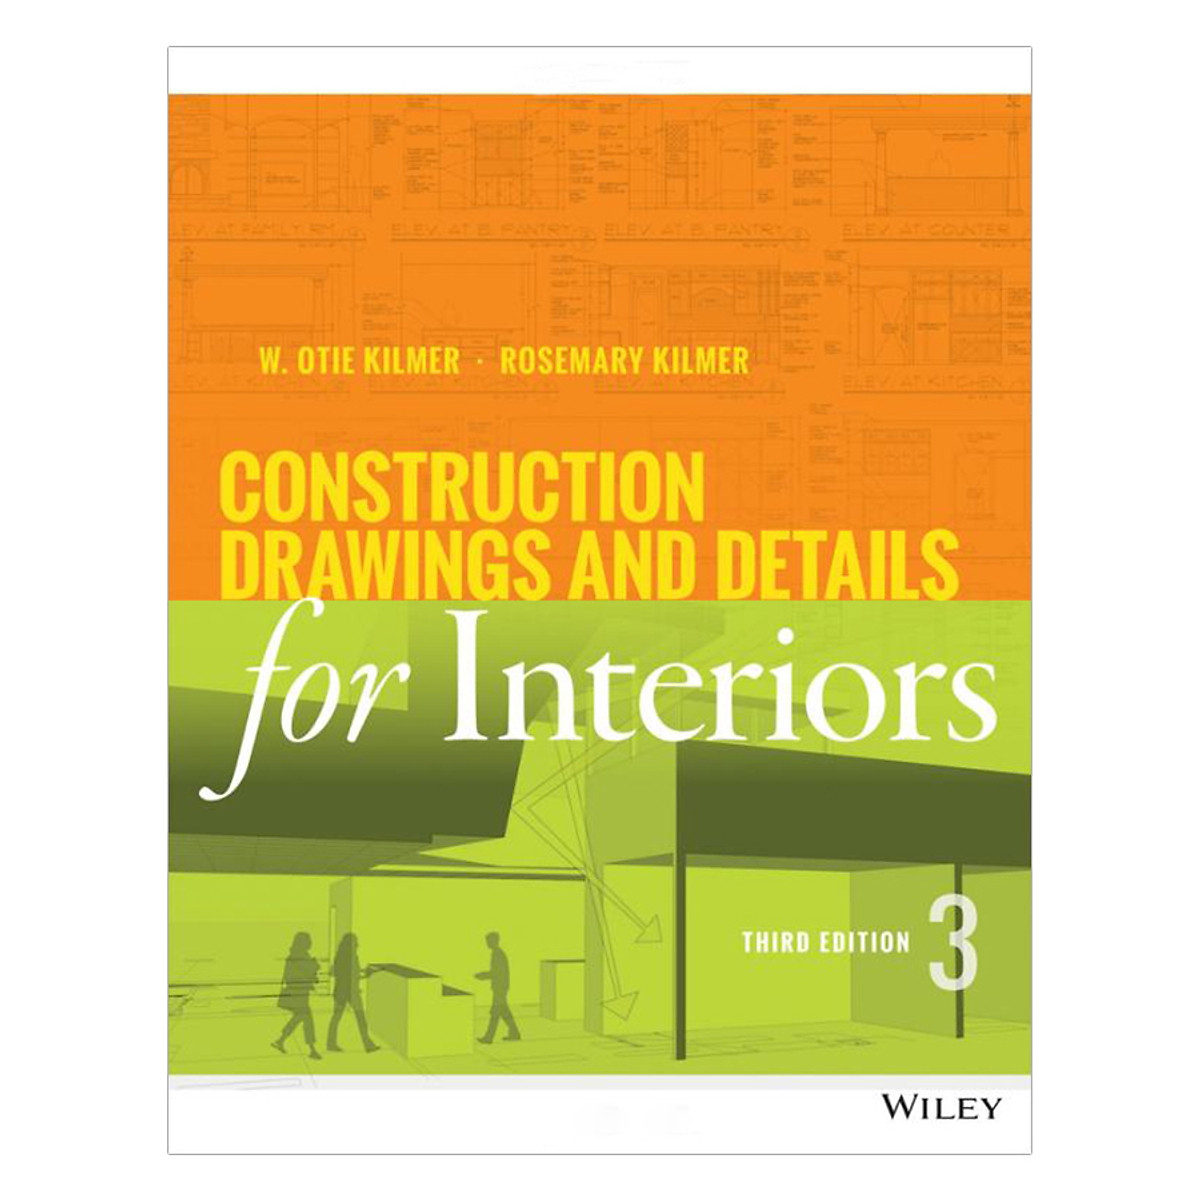 Construction Drawings And Details For Interiors, Third Edition